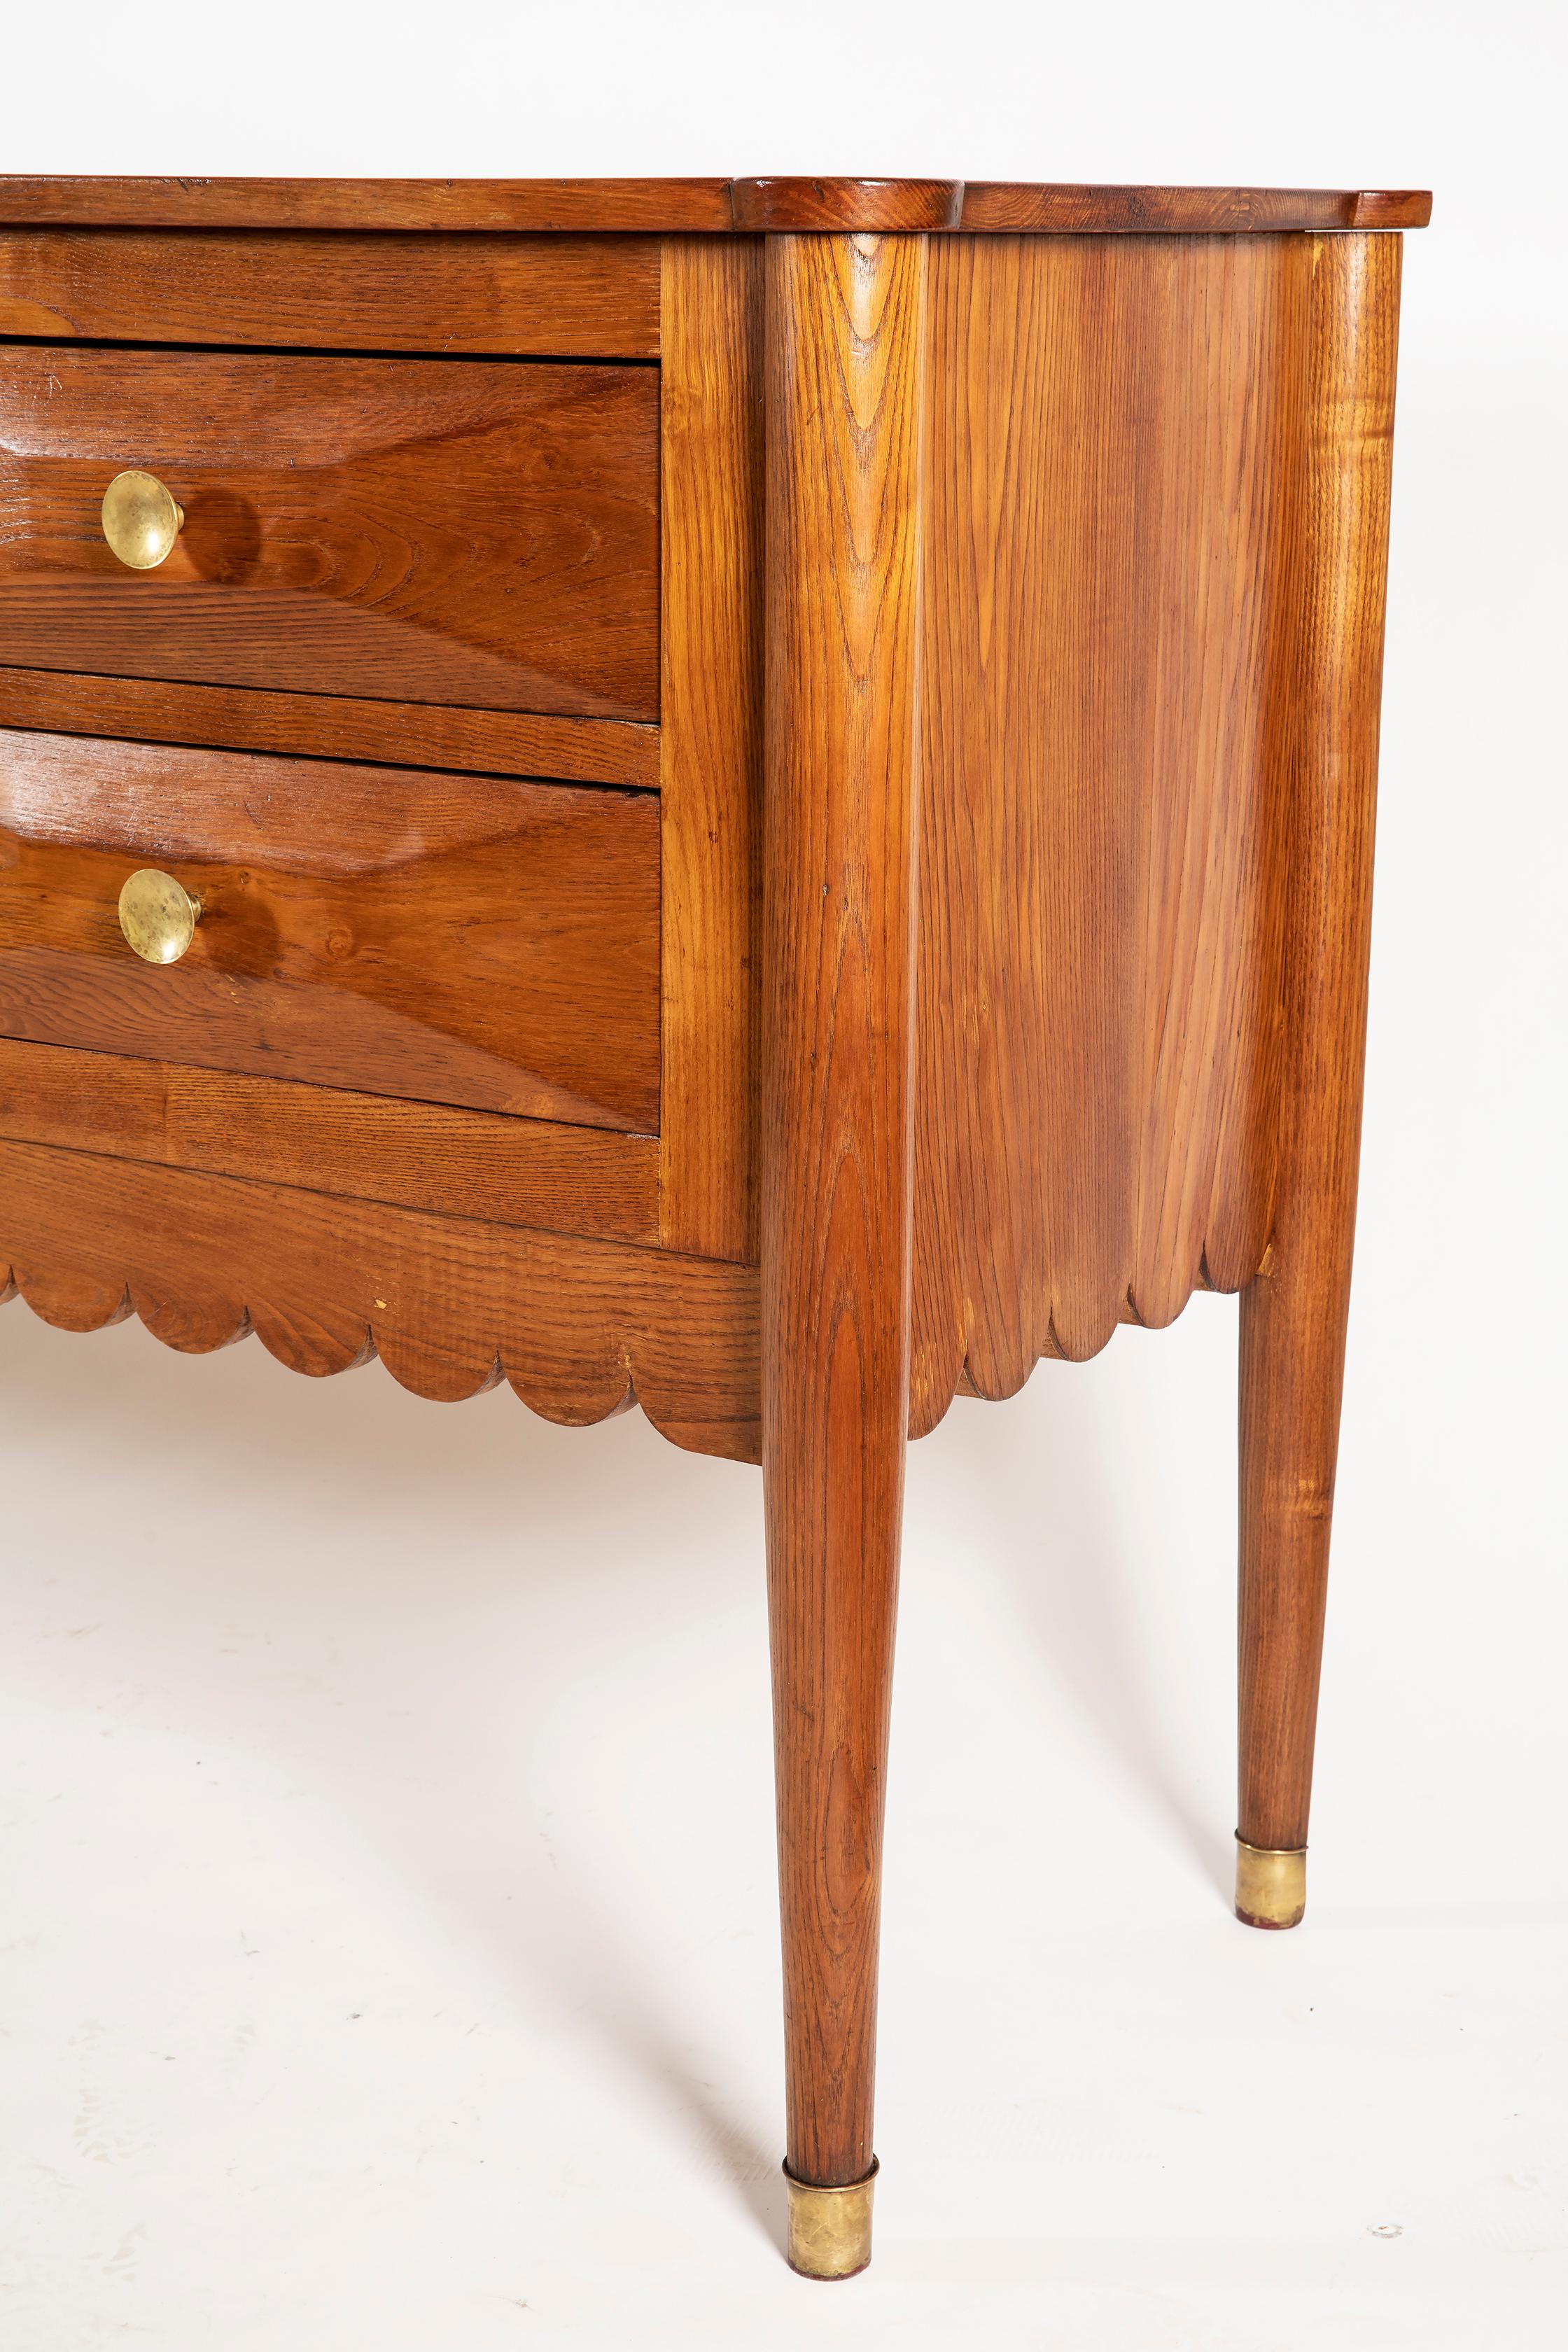 Lacquered Paolo Buffa Italian Oak Wood with 6 Ashlar-Work Drawers Credenza, 1940s